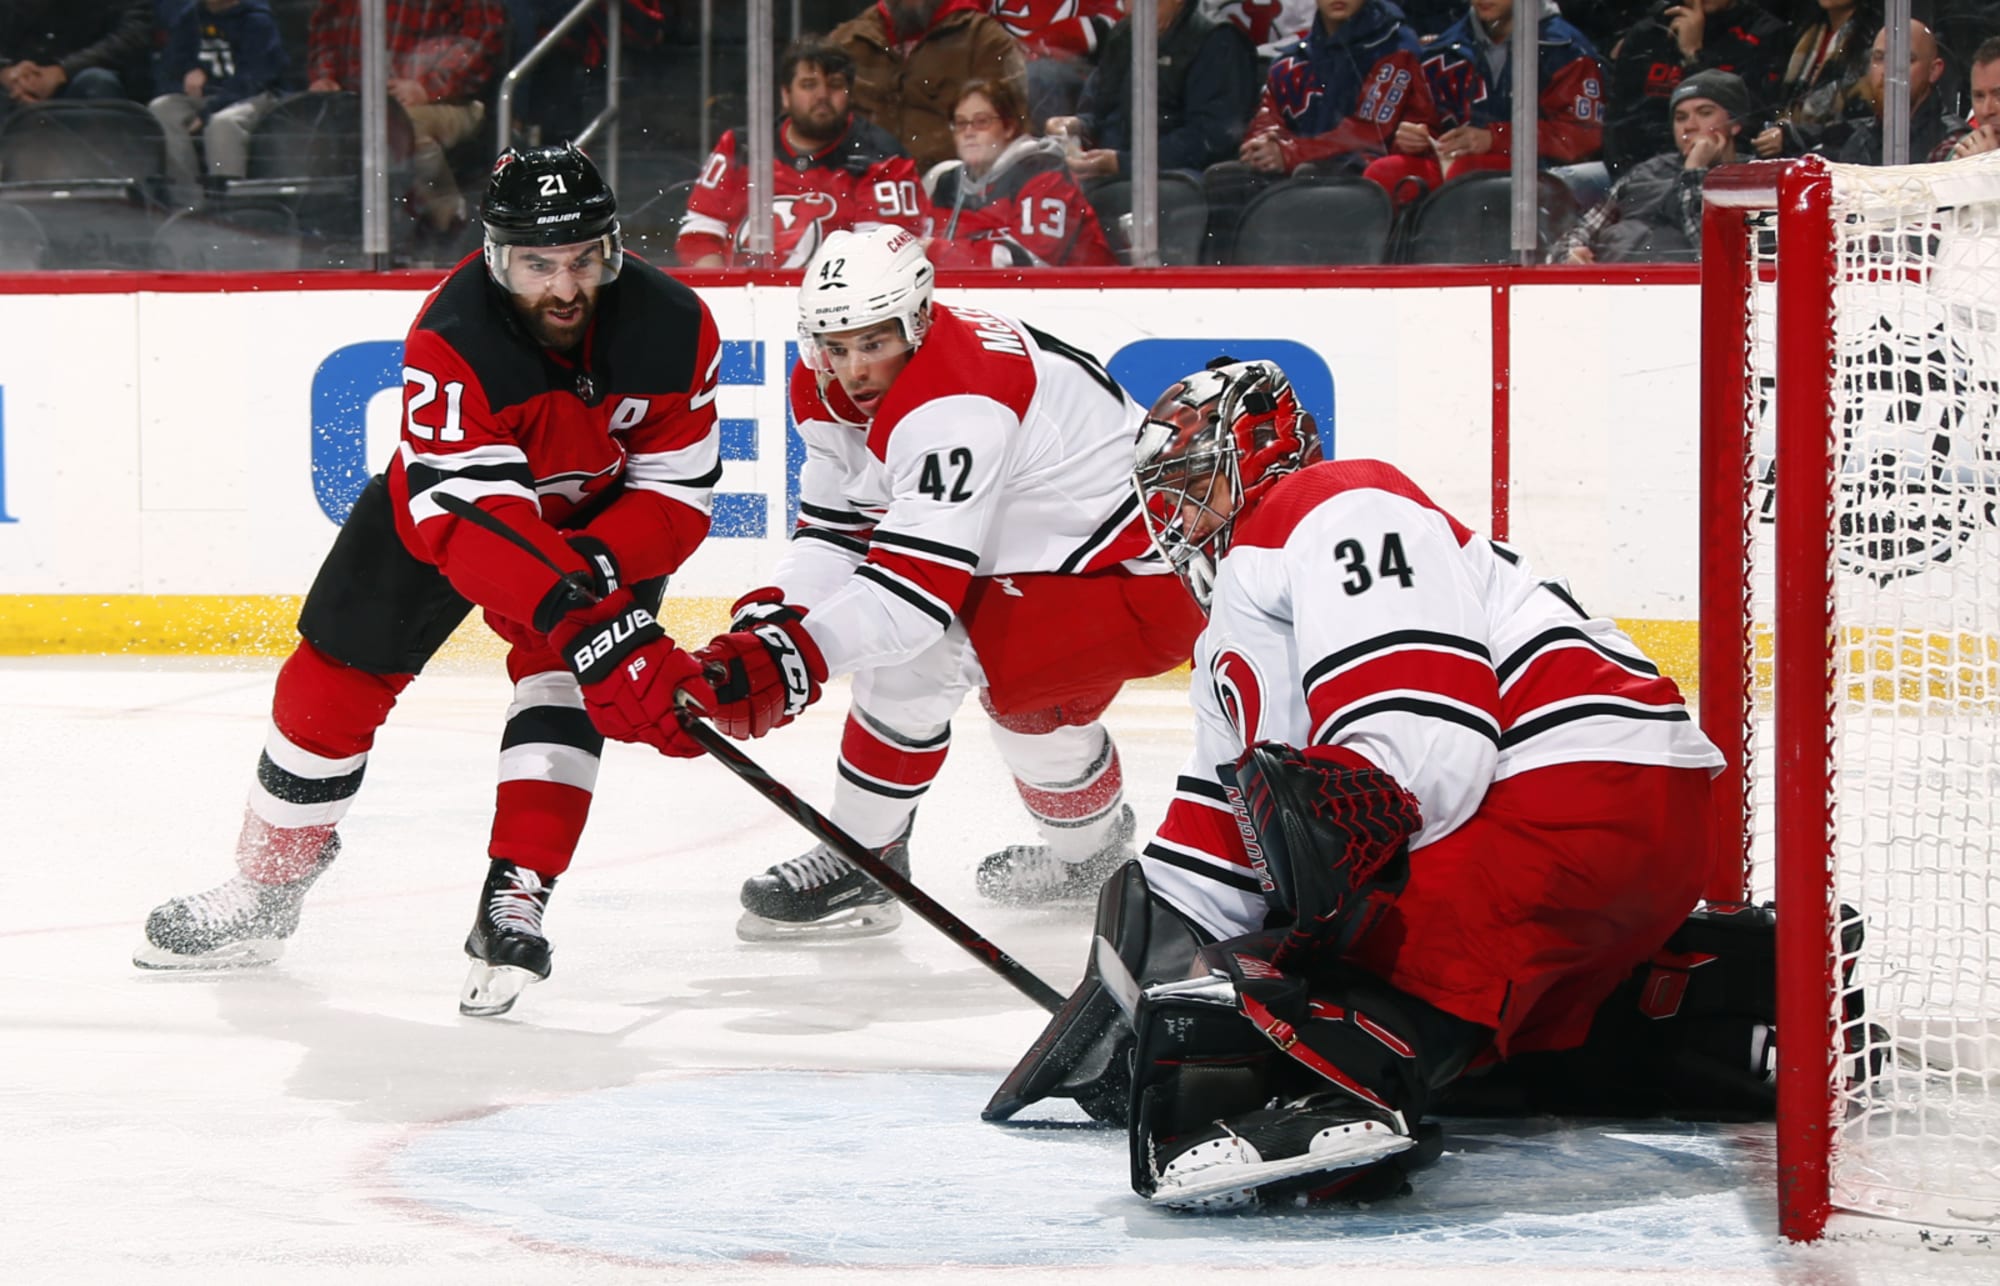 New Jersey Devils Cracked Carolina Hurricanes in 8-4 Blowout in Game 3 -  All About The Jersey